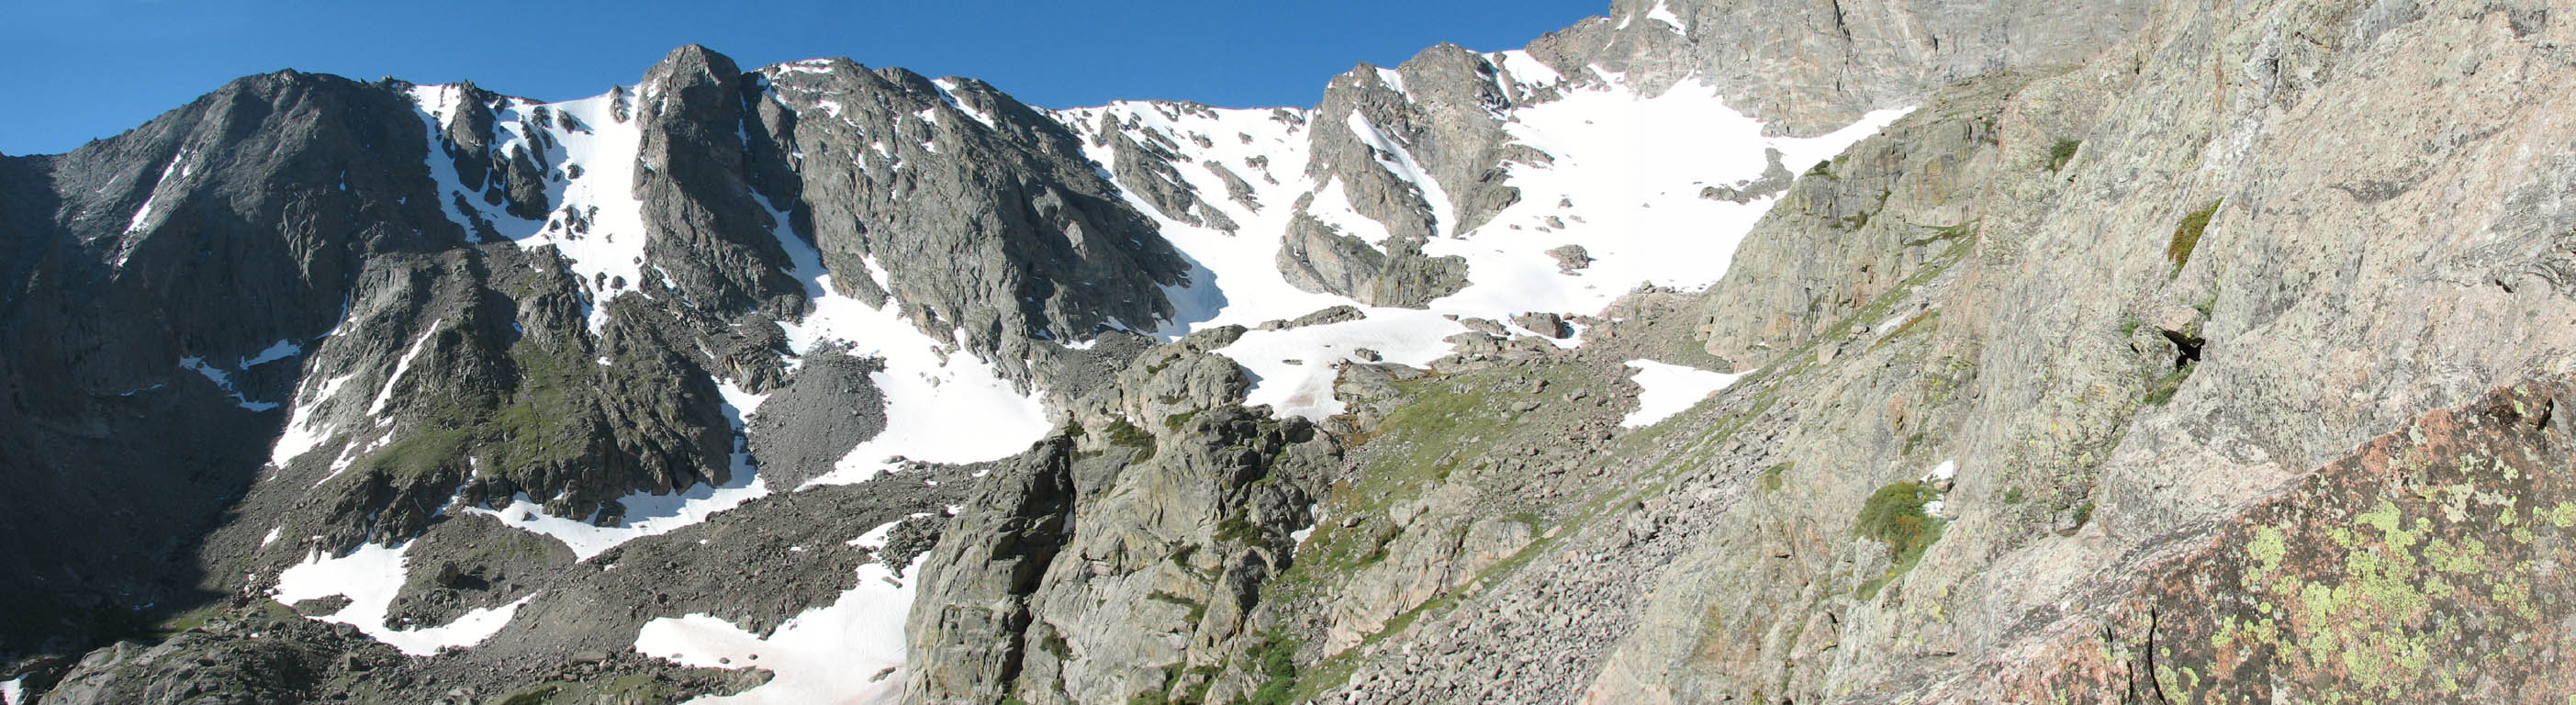 Panorama of the view from Petit Grepon.  Taylor glacier and Taylor peak are on the left. (Category:  Rock Climbing)